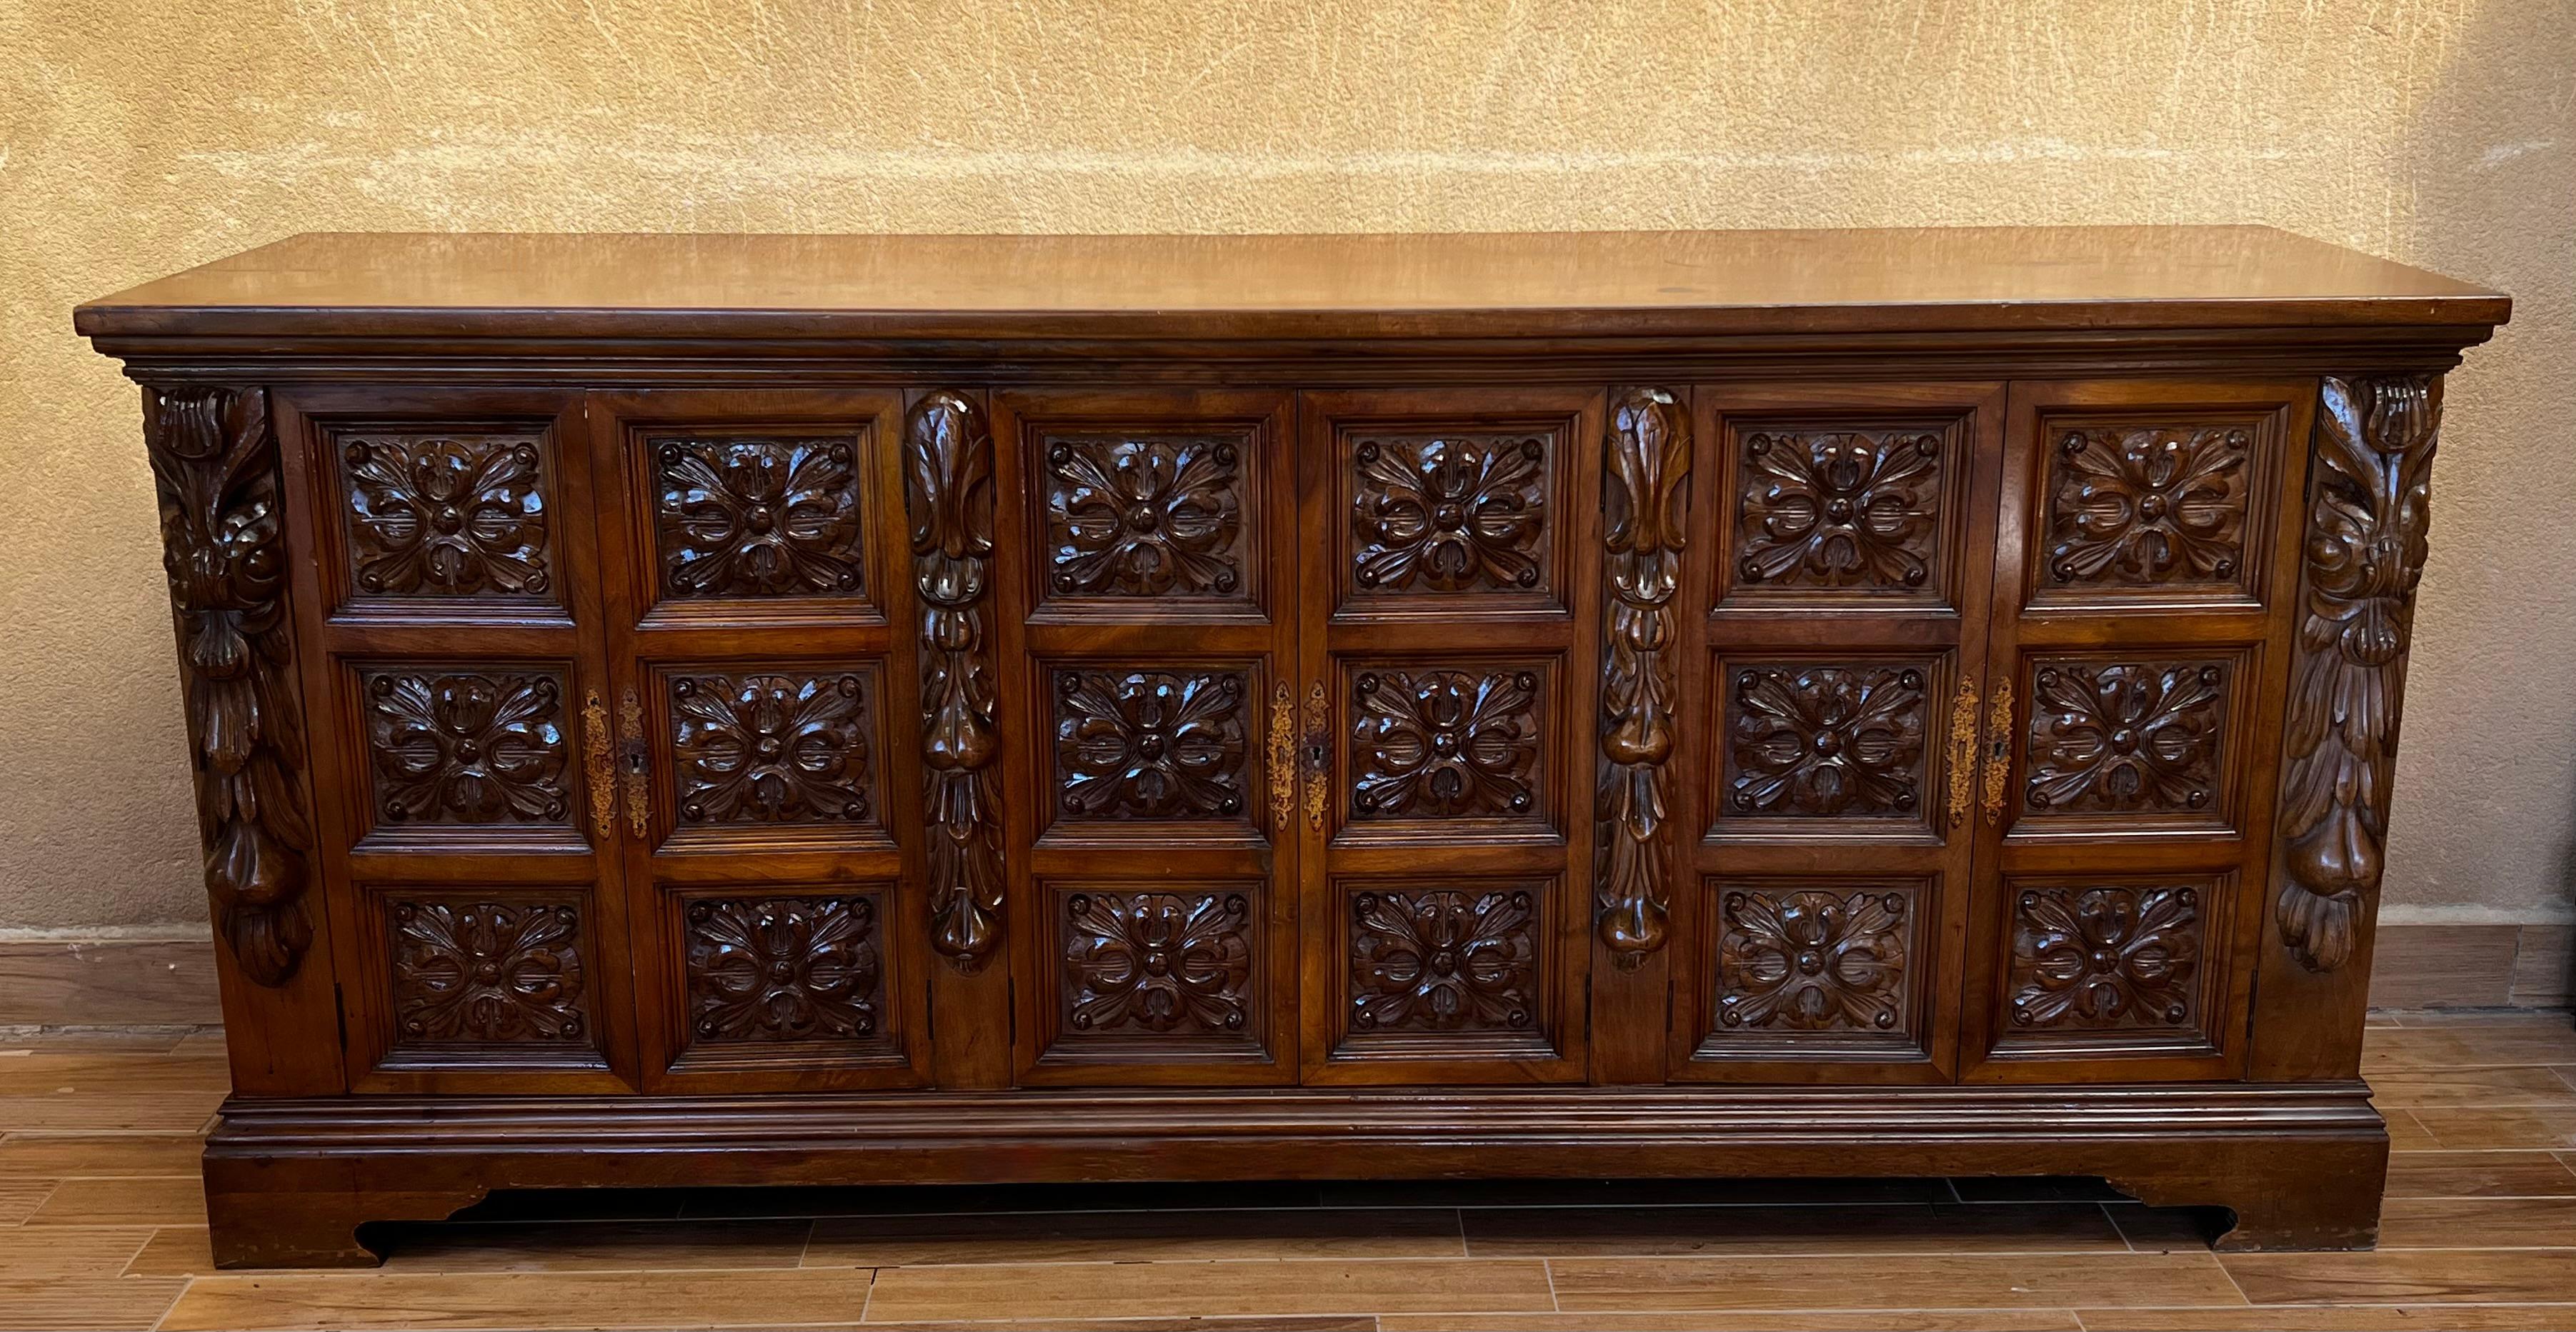 This heavily carved credenza was created in Spain circa 1870. Built of solid walnut, the buffet stands on elegant decorated base. The cabinet features six doors across the front opening to inside shelving for ultimate storage, over a scalloped